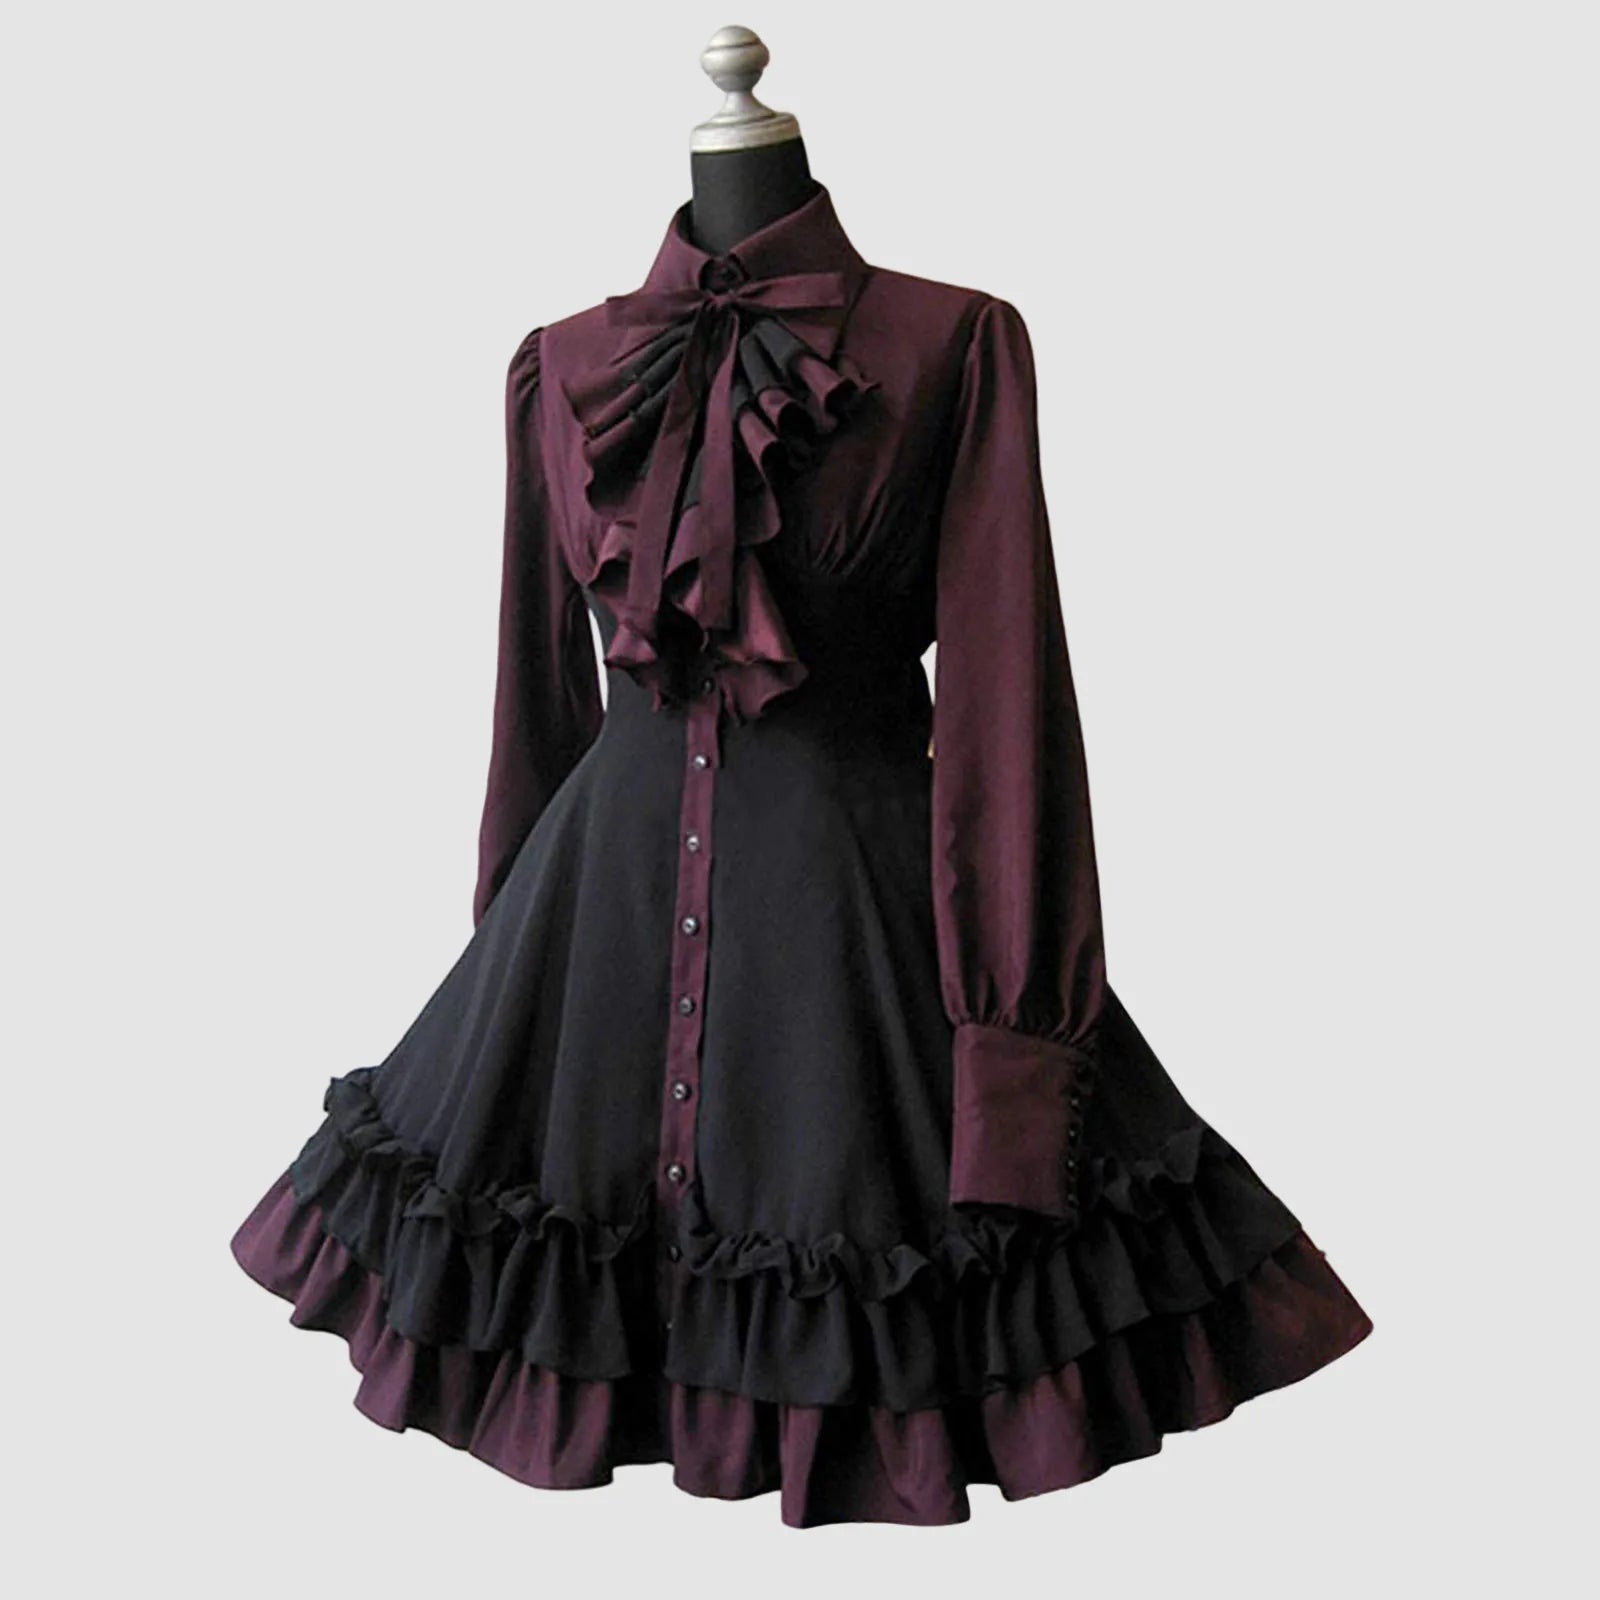 Autumn Elegant Gothic Lolita Dress - Pleated Lace-Up - Kawaii Stop - Autumn Fashion, Cosplay, Costume, Elegant, Gothic Lolita Dress, Irregular Length, Mainland China, Pleated Lace-Up, Polyester, Sophisticated Style, Women's Fashion